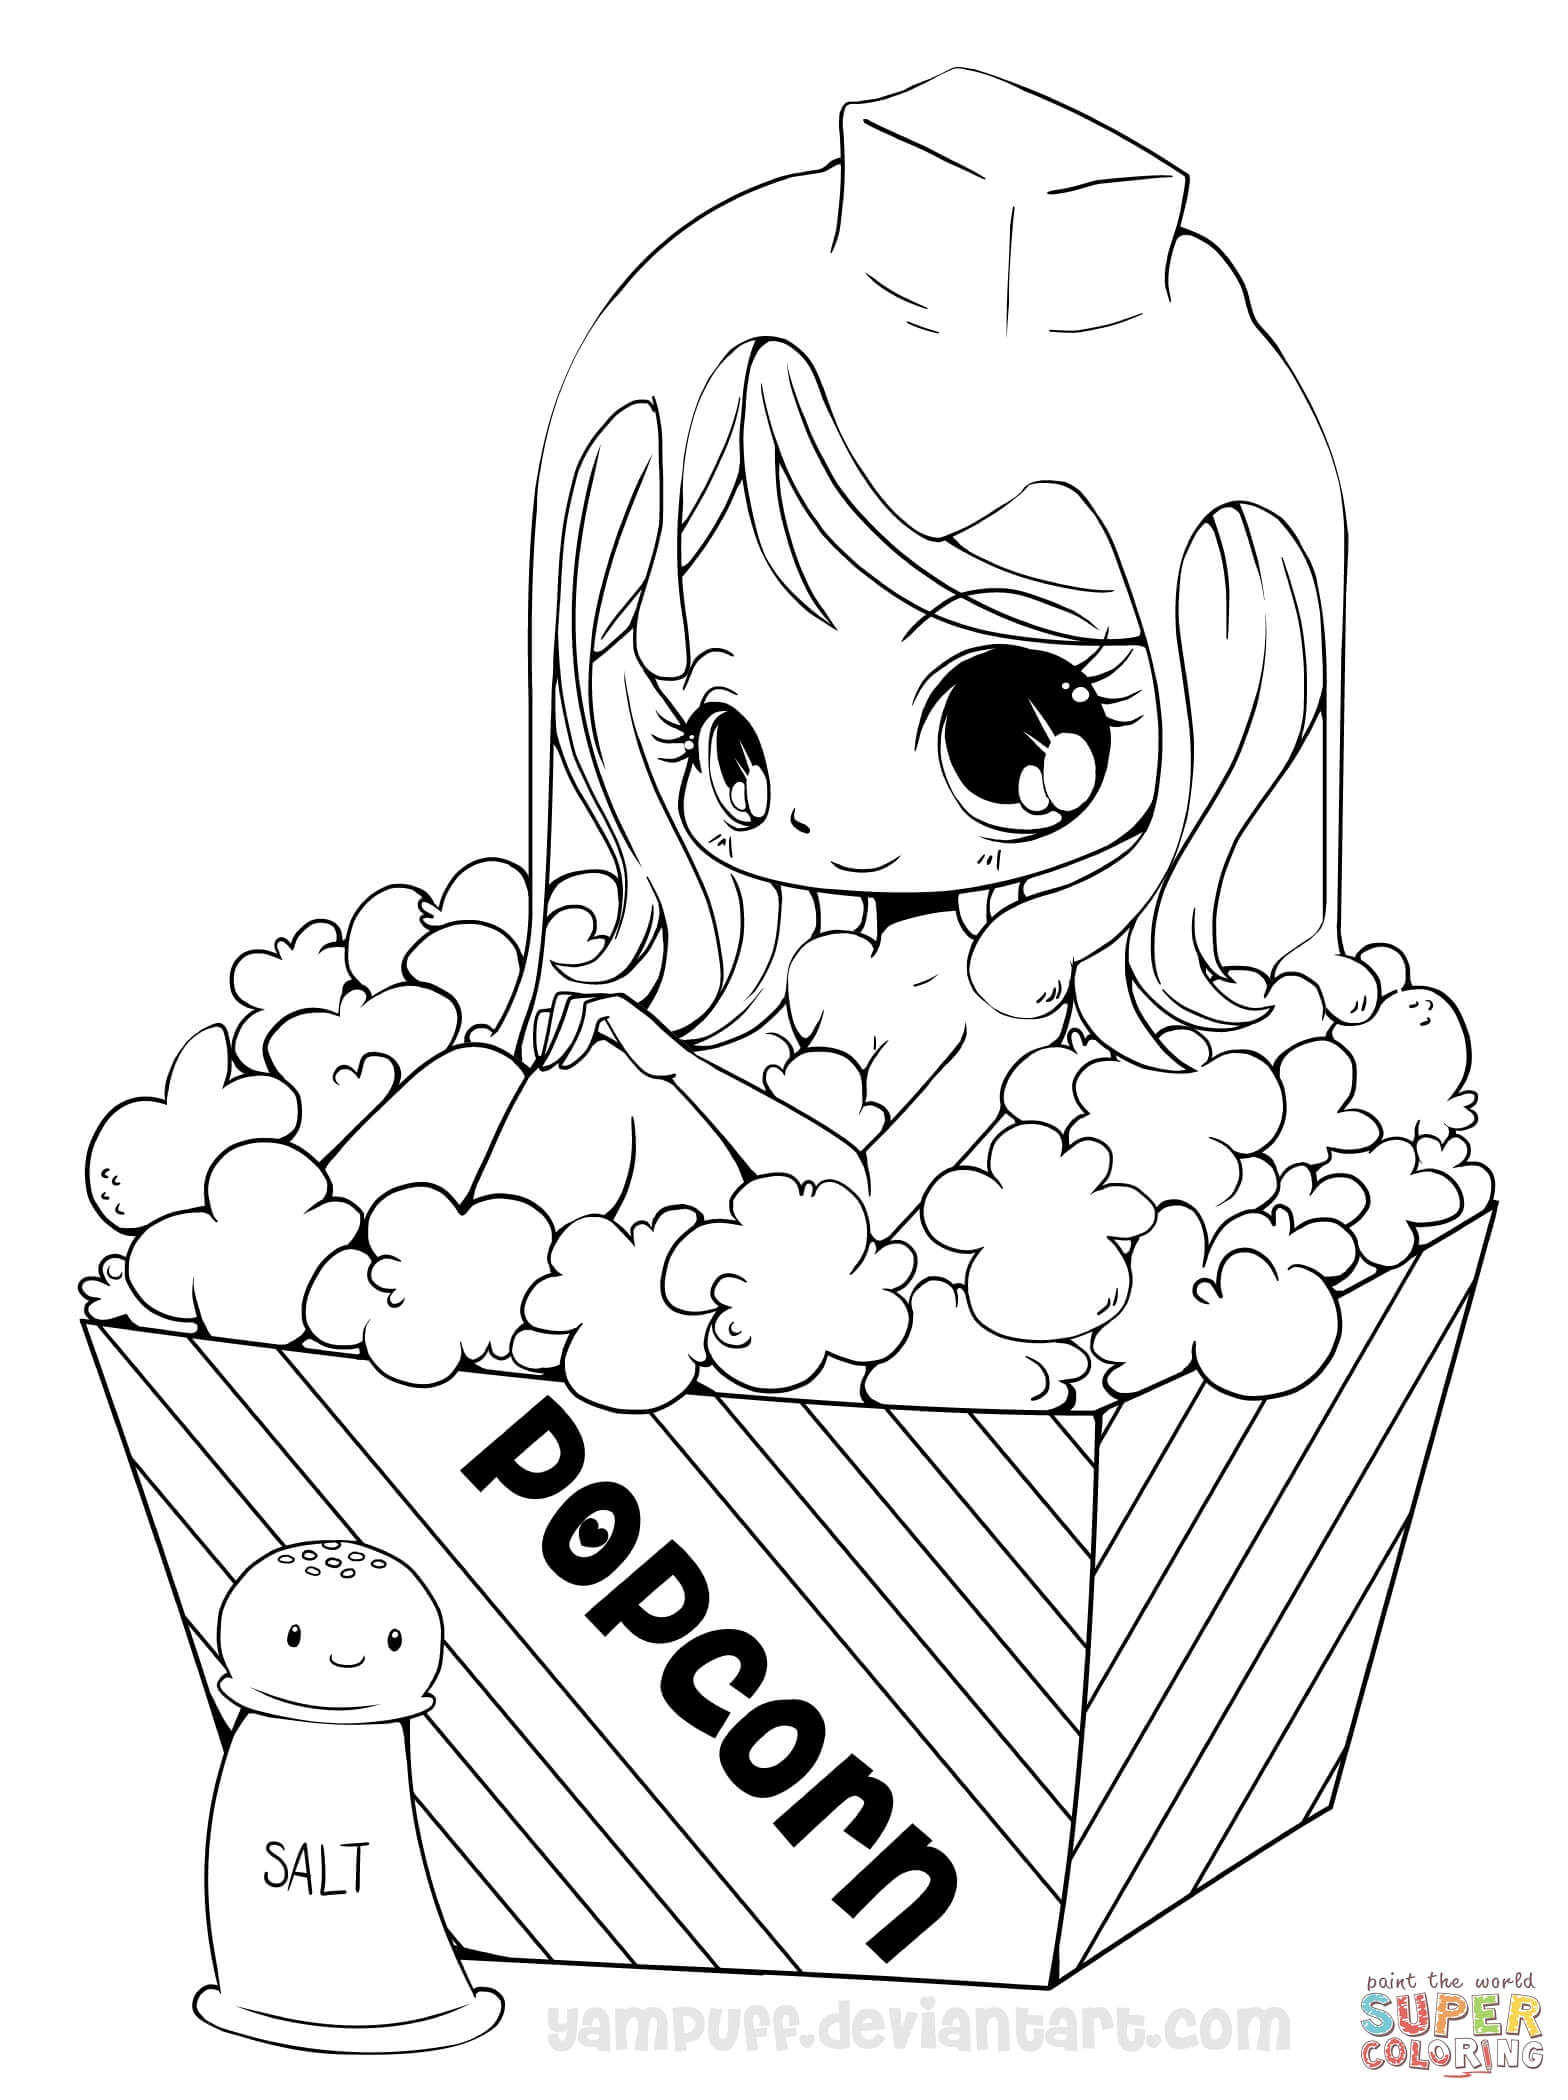 Chibi Anime 20 Coloring Pages   Chibi Anime Coloring Pages ...